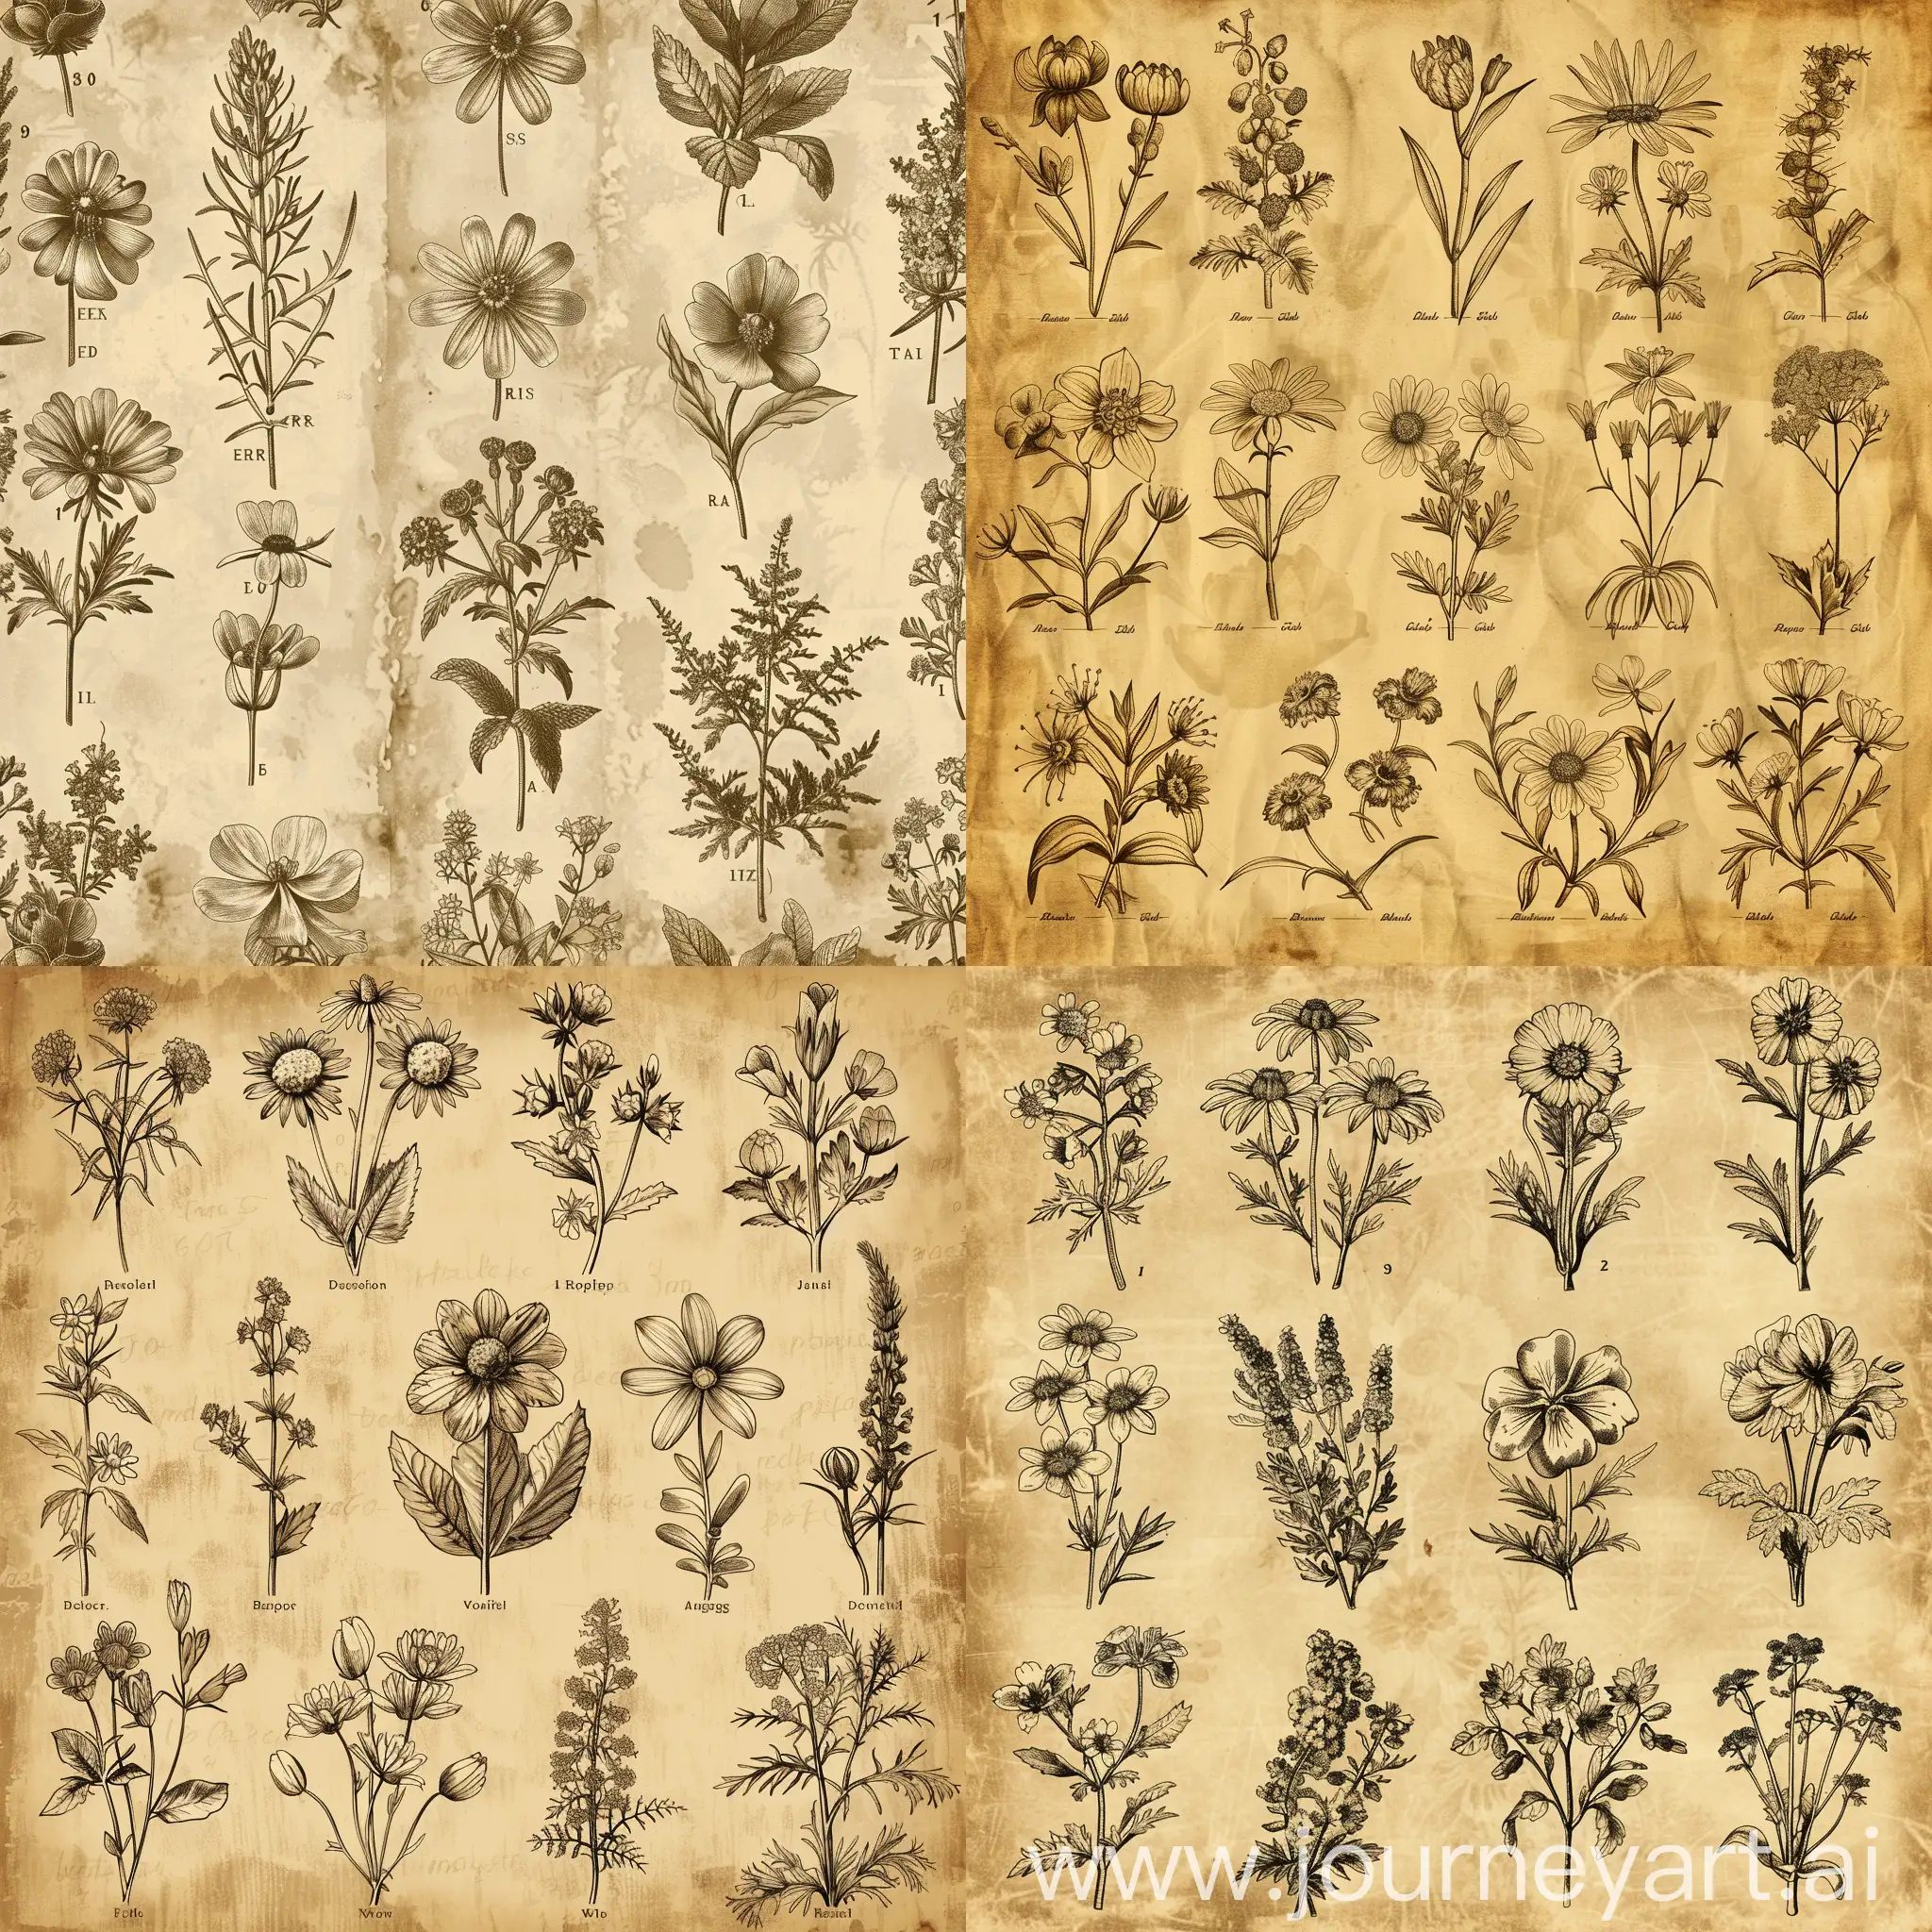 A vintage botanical illustration pattern, featuring a variety of wildflowers with scientific accuracy. Each flower is meticulously detailed, labeled with its Latin name, and set against a parchment background, evoking the feel of an old herbarium. Created Using: vintage illustration style, botanical drawing accuracy, sepia-toned background, fine line work, antique texture simulation, educational detail, artistic composition, hd quality, natural look